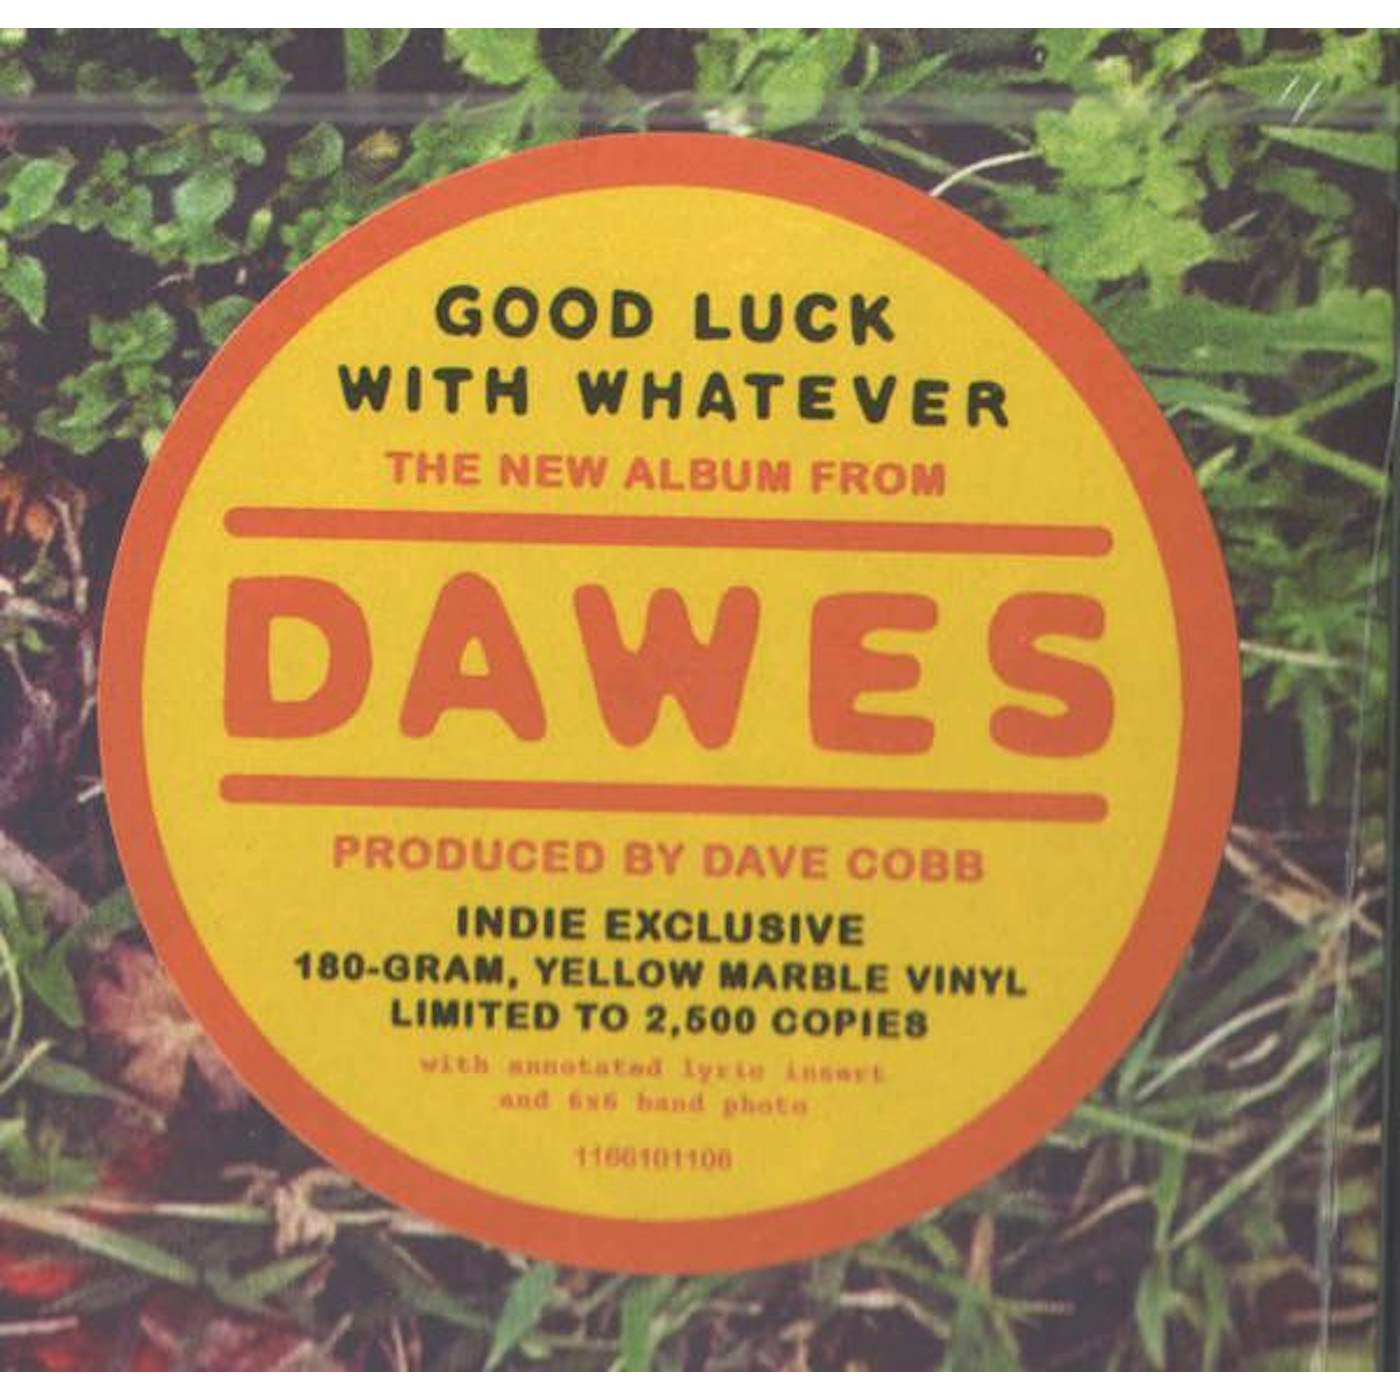 Dawes GOOD LUCK WITH WHATEVER (YELLOW MARBLE VINYL/180G) (I) Vinyl Record